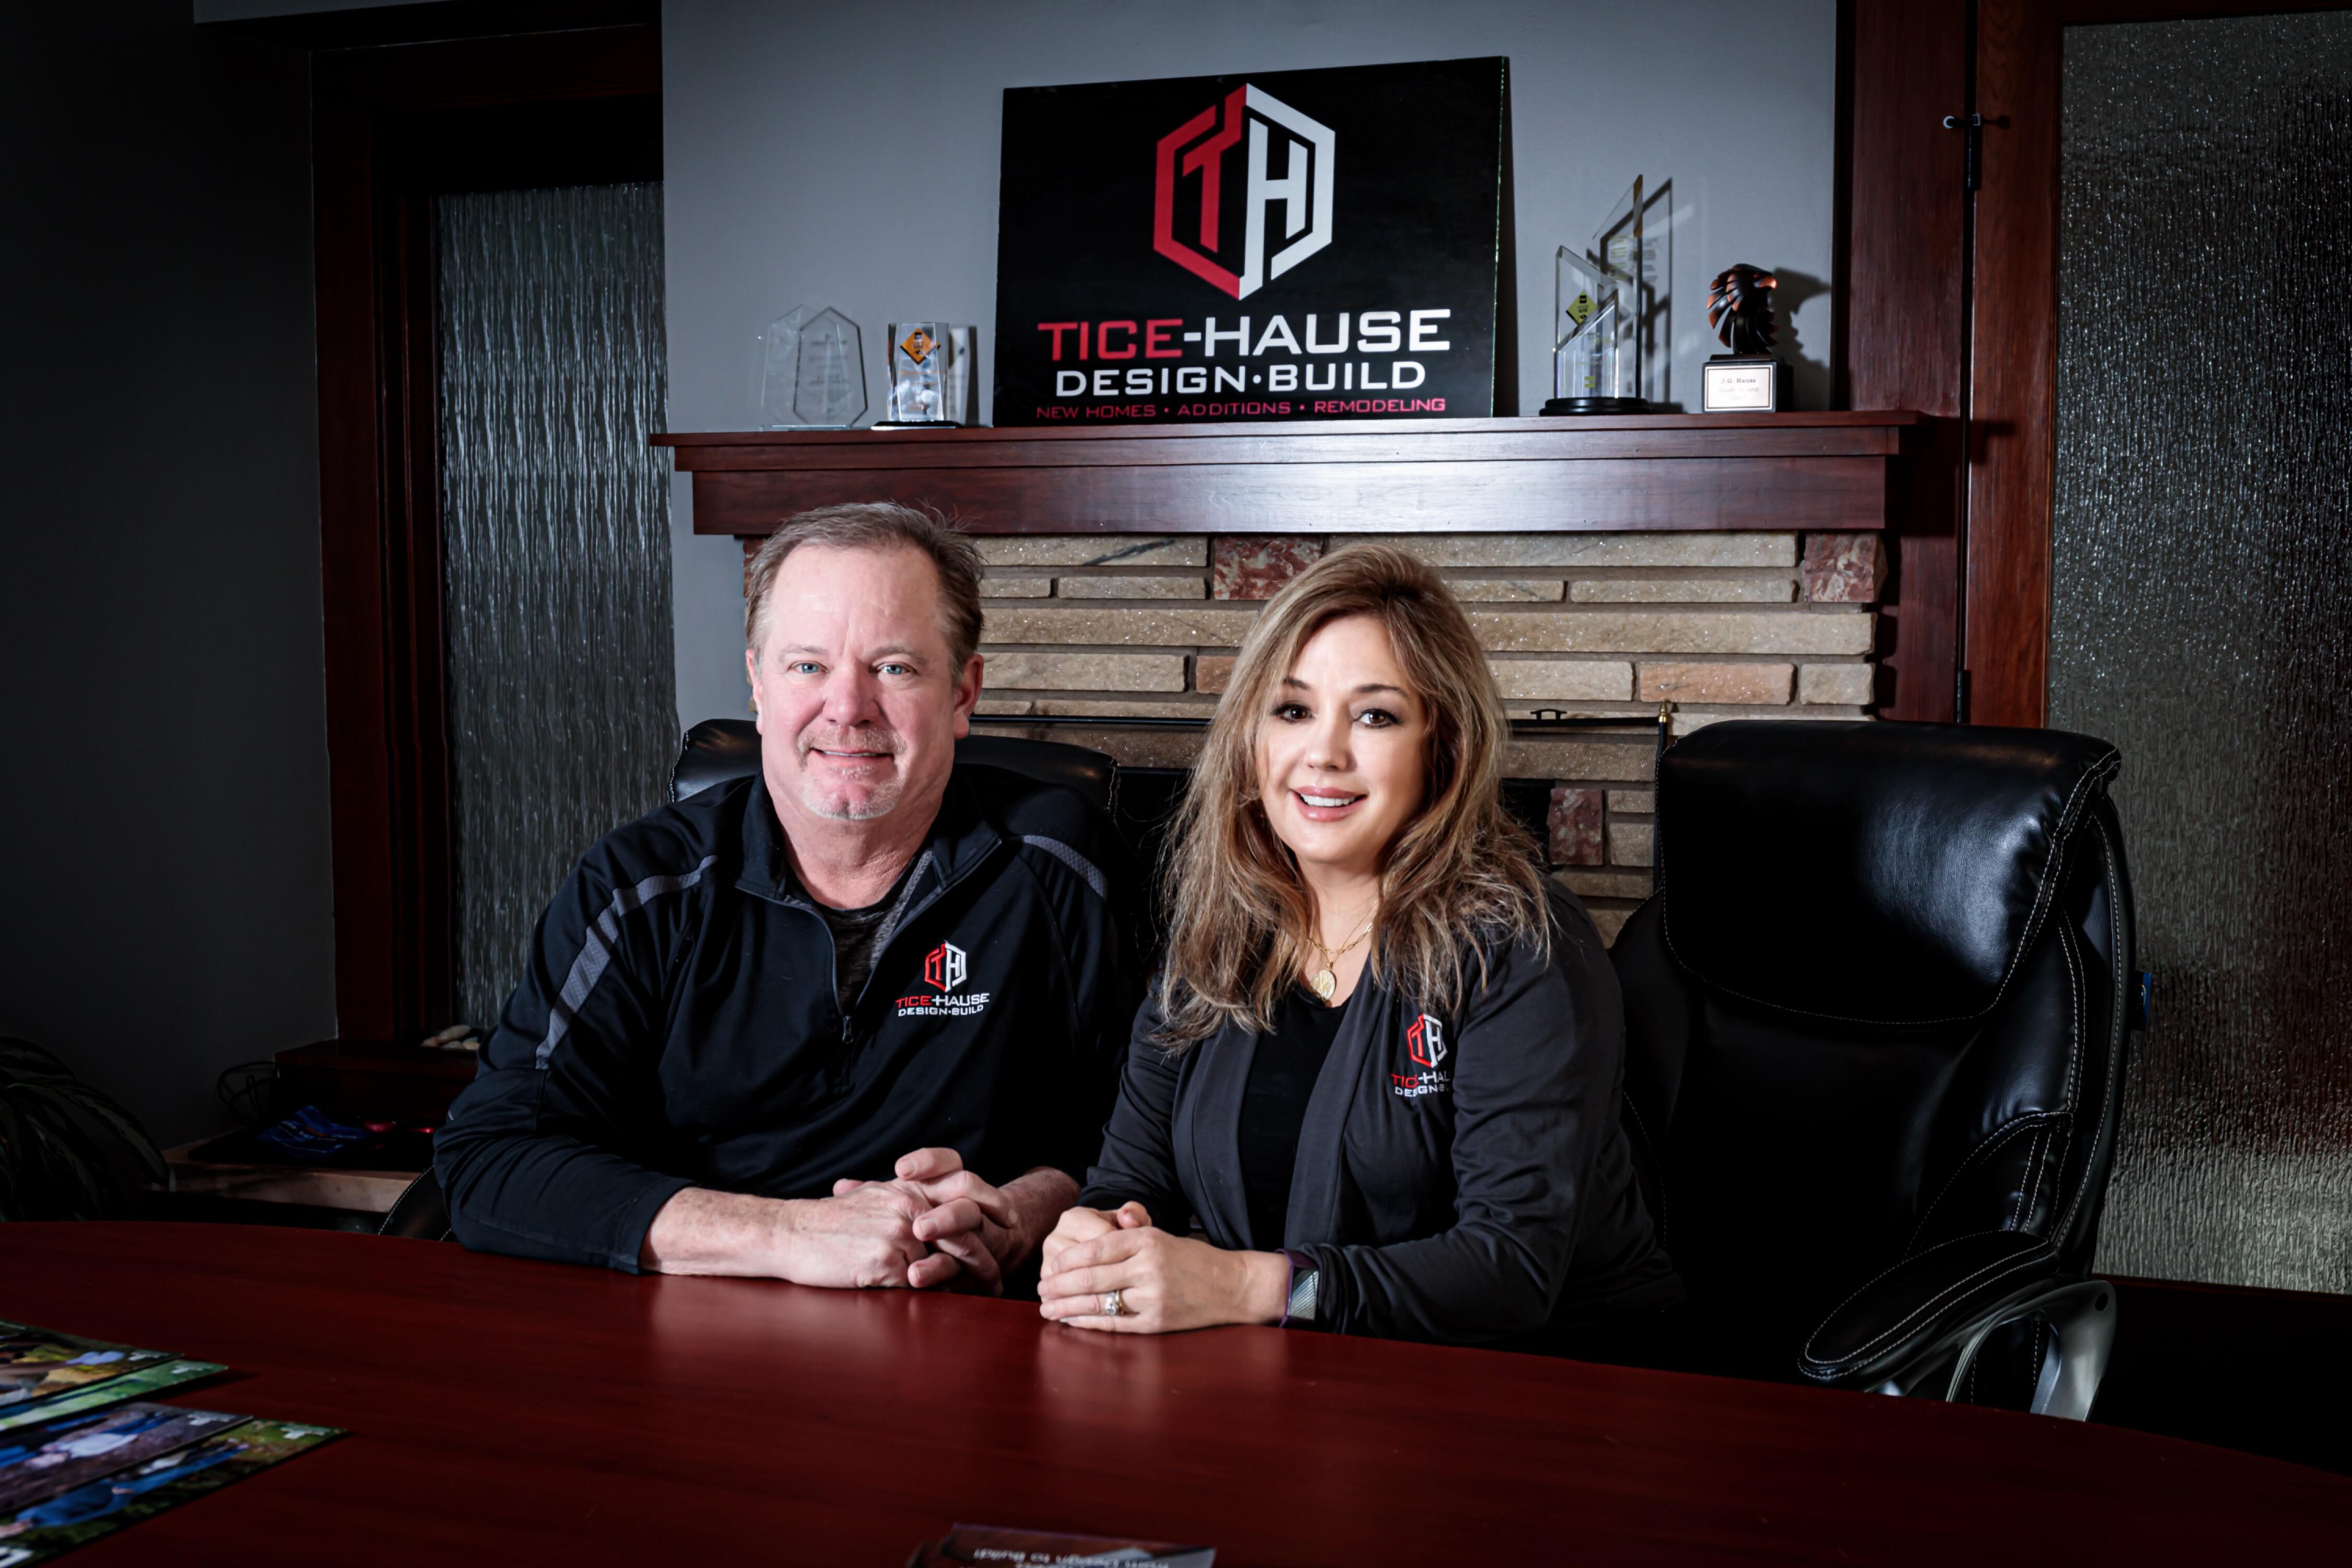 Our sister company is Tice-Hause Design/Build. We specialize in custom homes, additions and remodeli J.G. Hause Construction, Inc Oakdale (651)439-0189